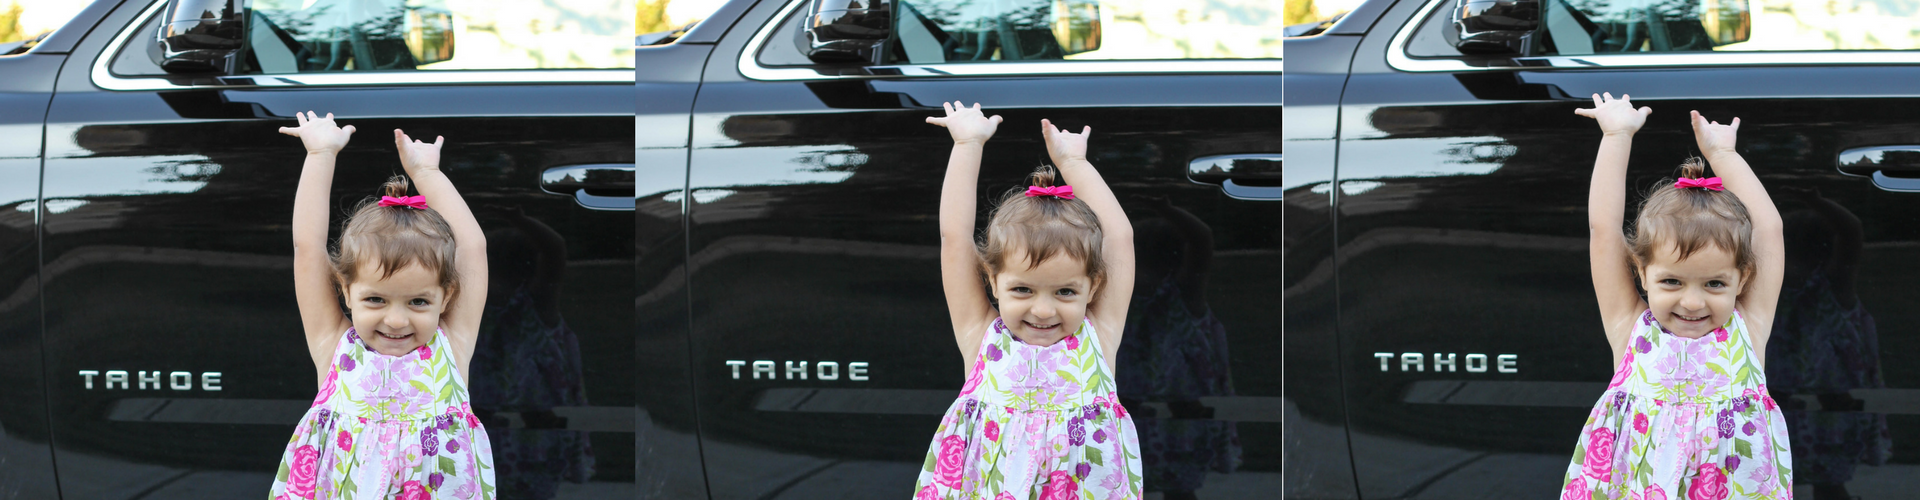 Navigating Back to School with the 2017 Chevy Tahoe!